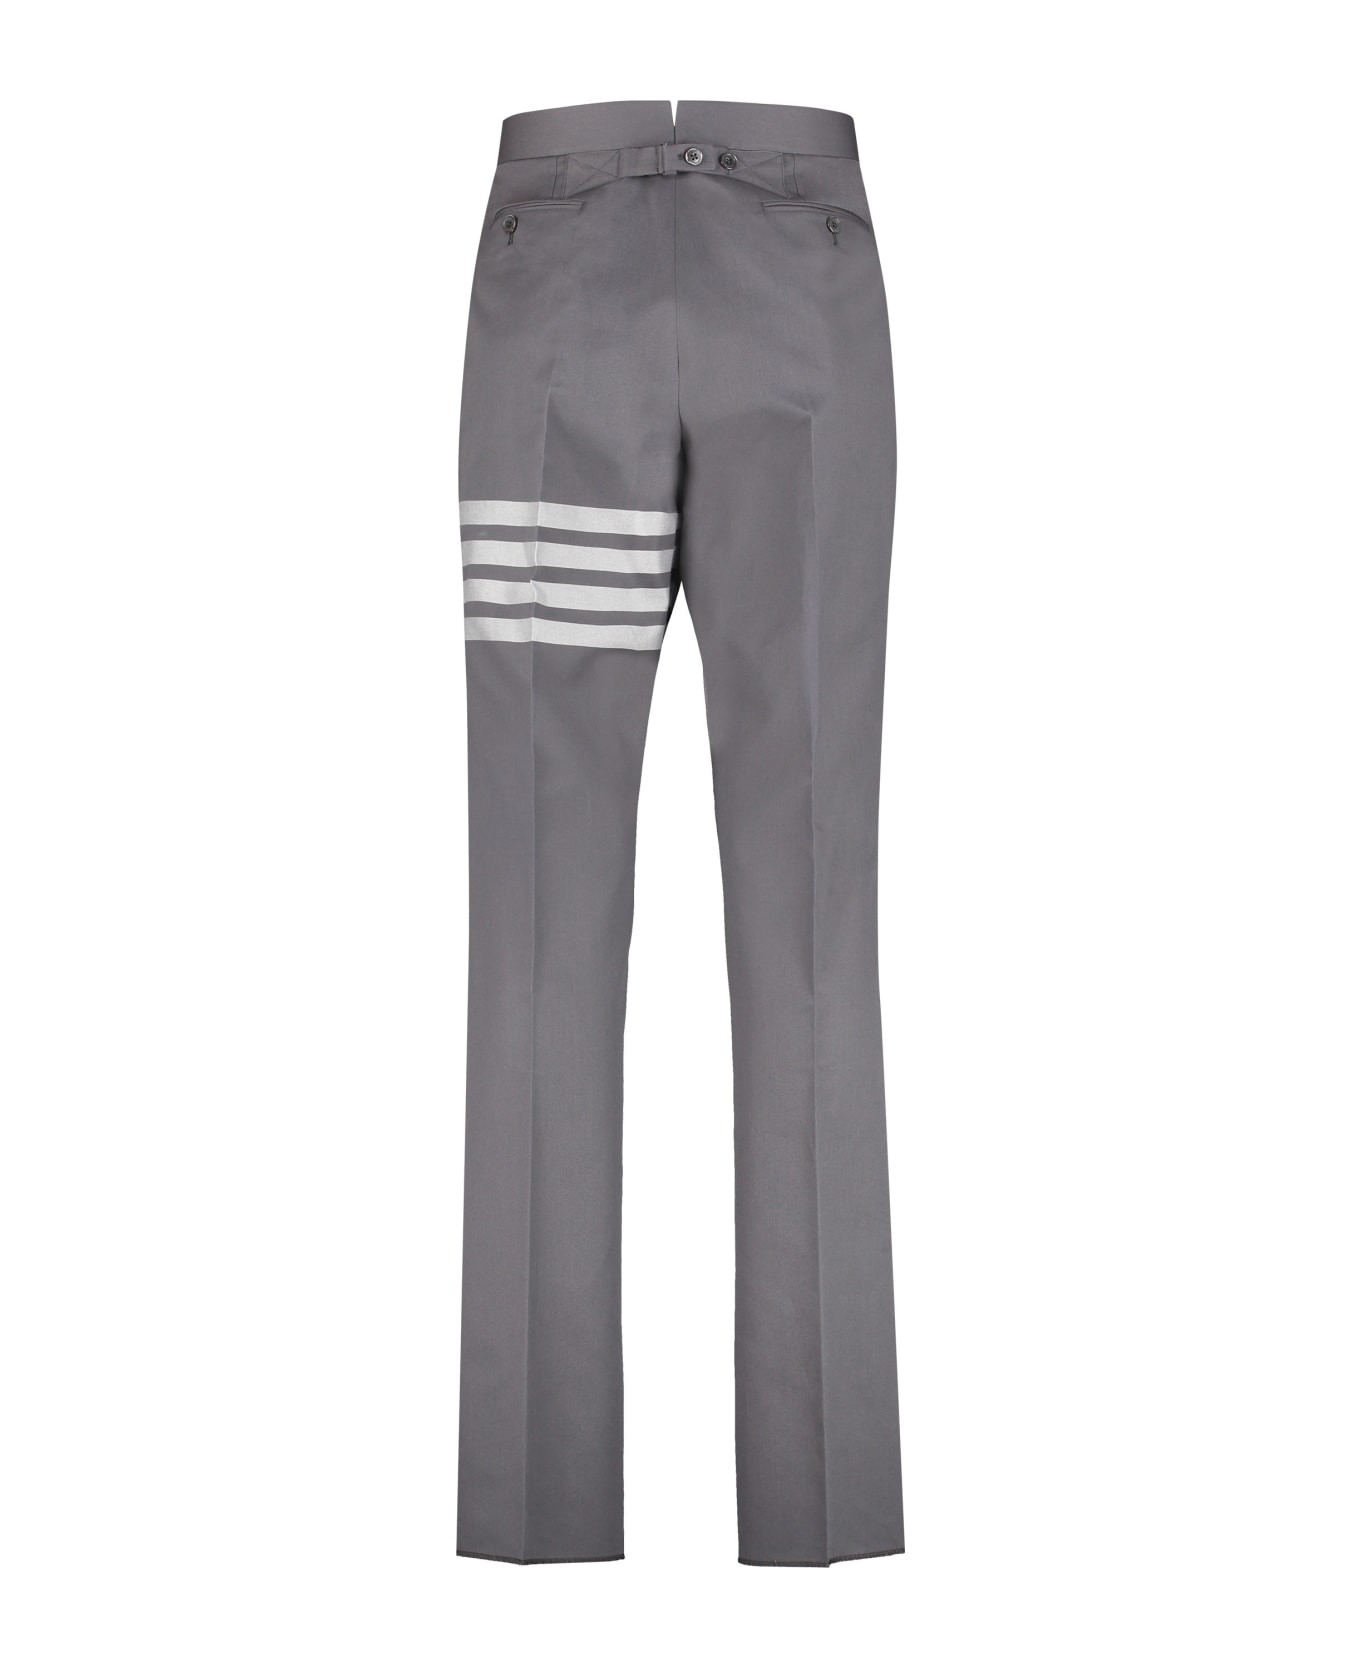 Thom Browne Tailored Trousers - grey